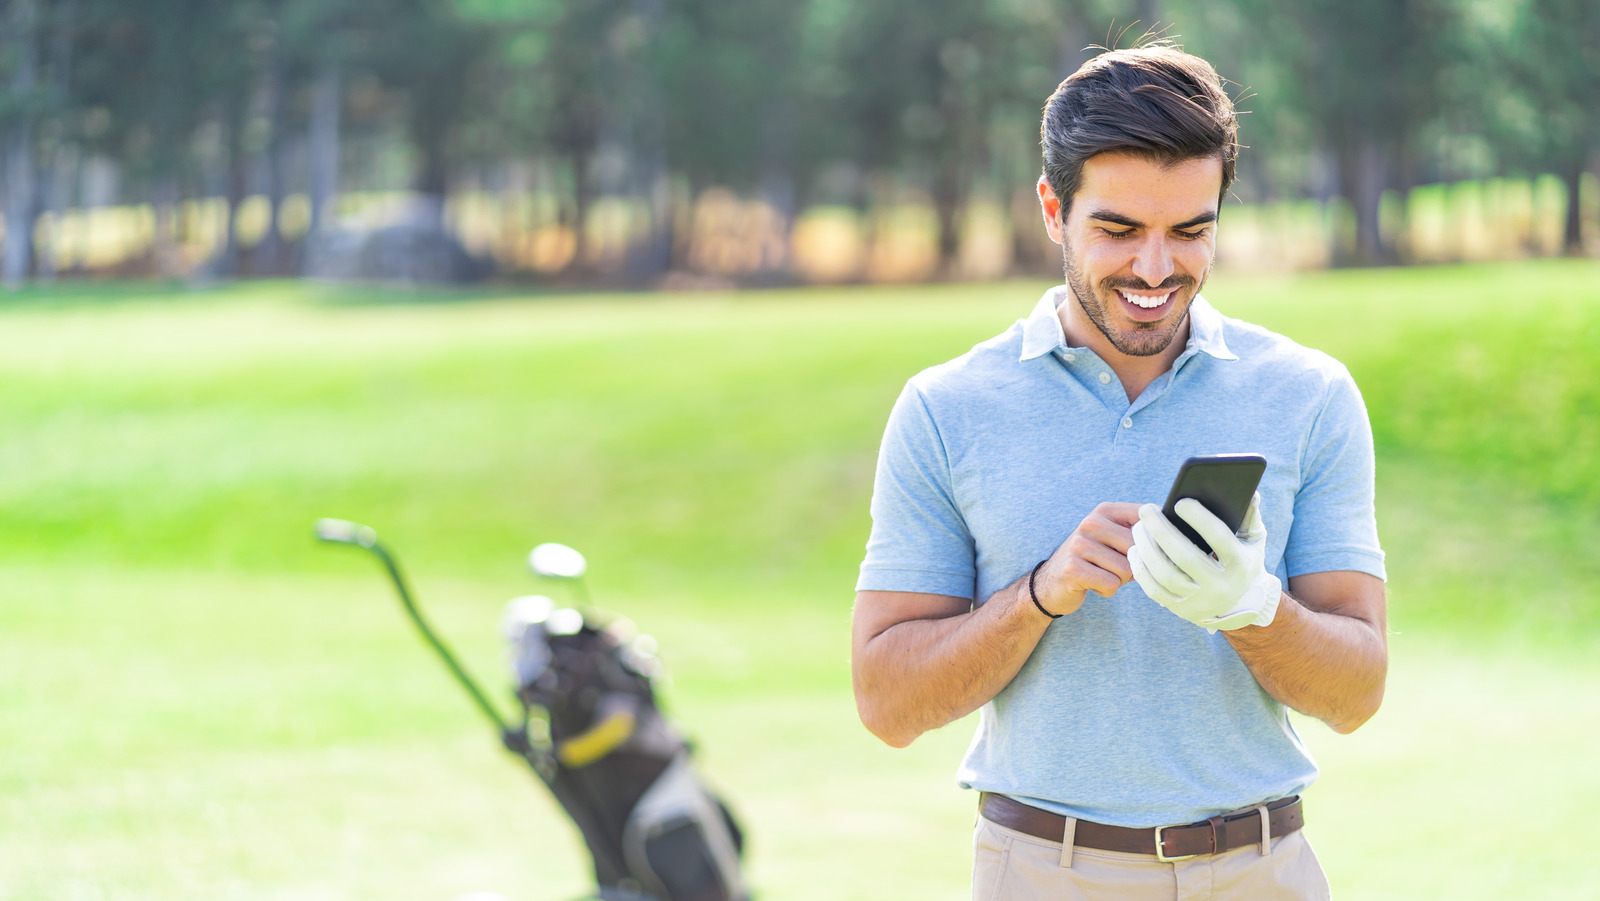 5 iPhone Apps Every Golfer Should Have Installed – SlashGear